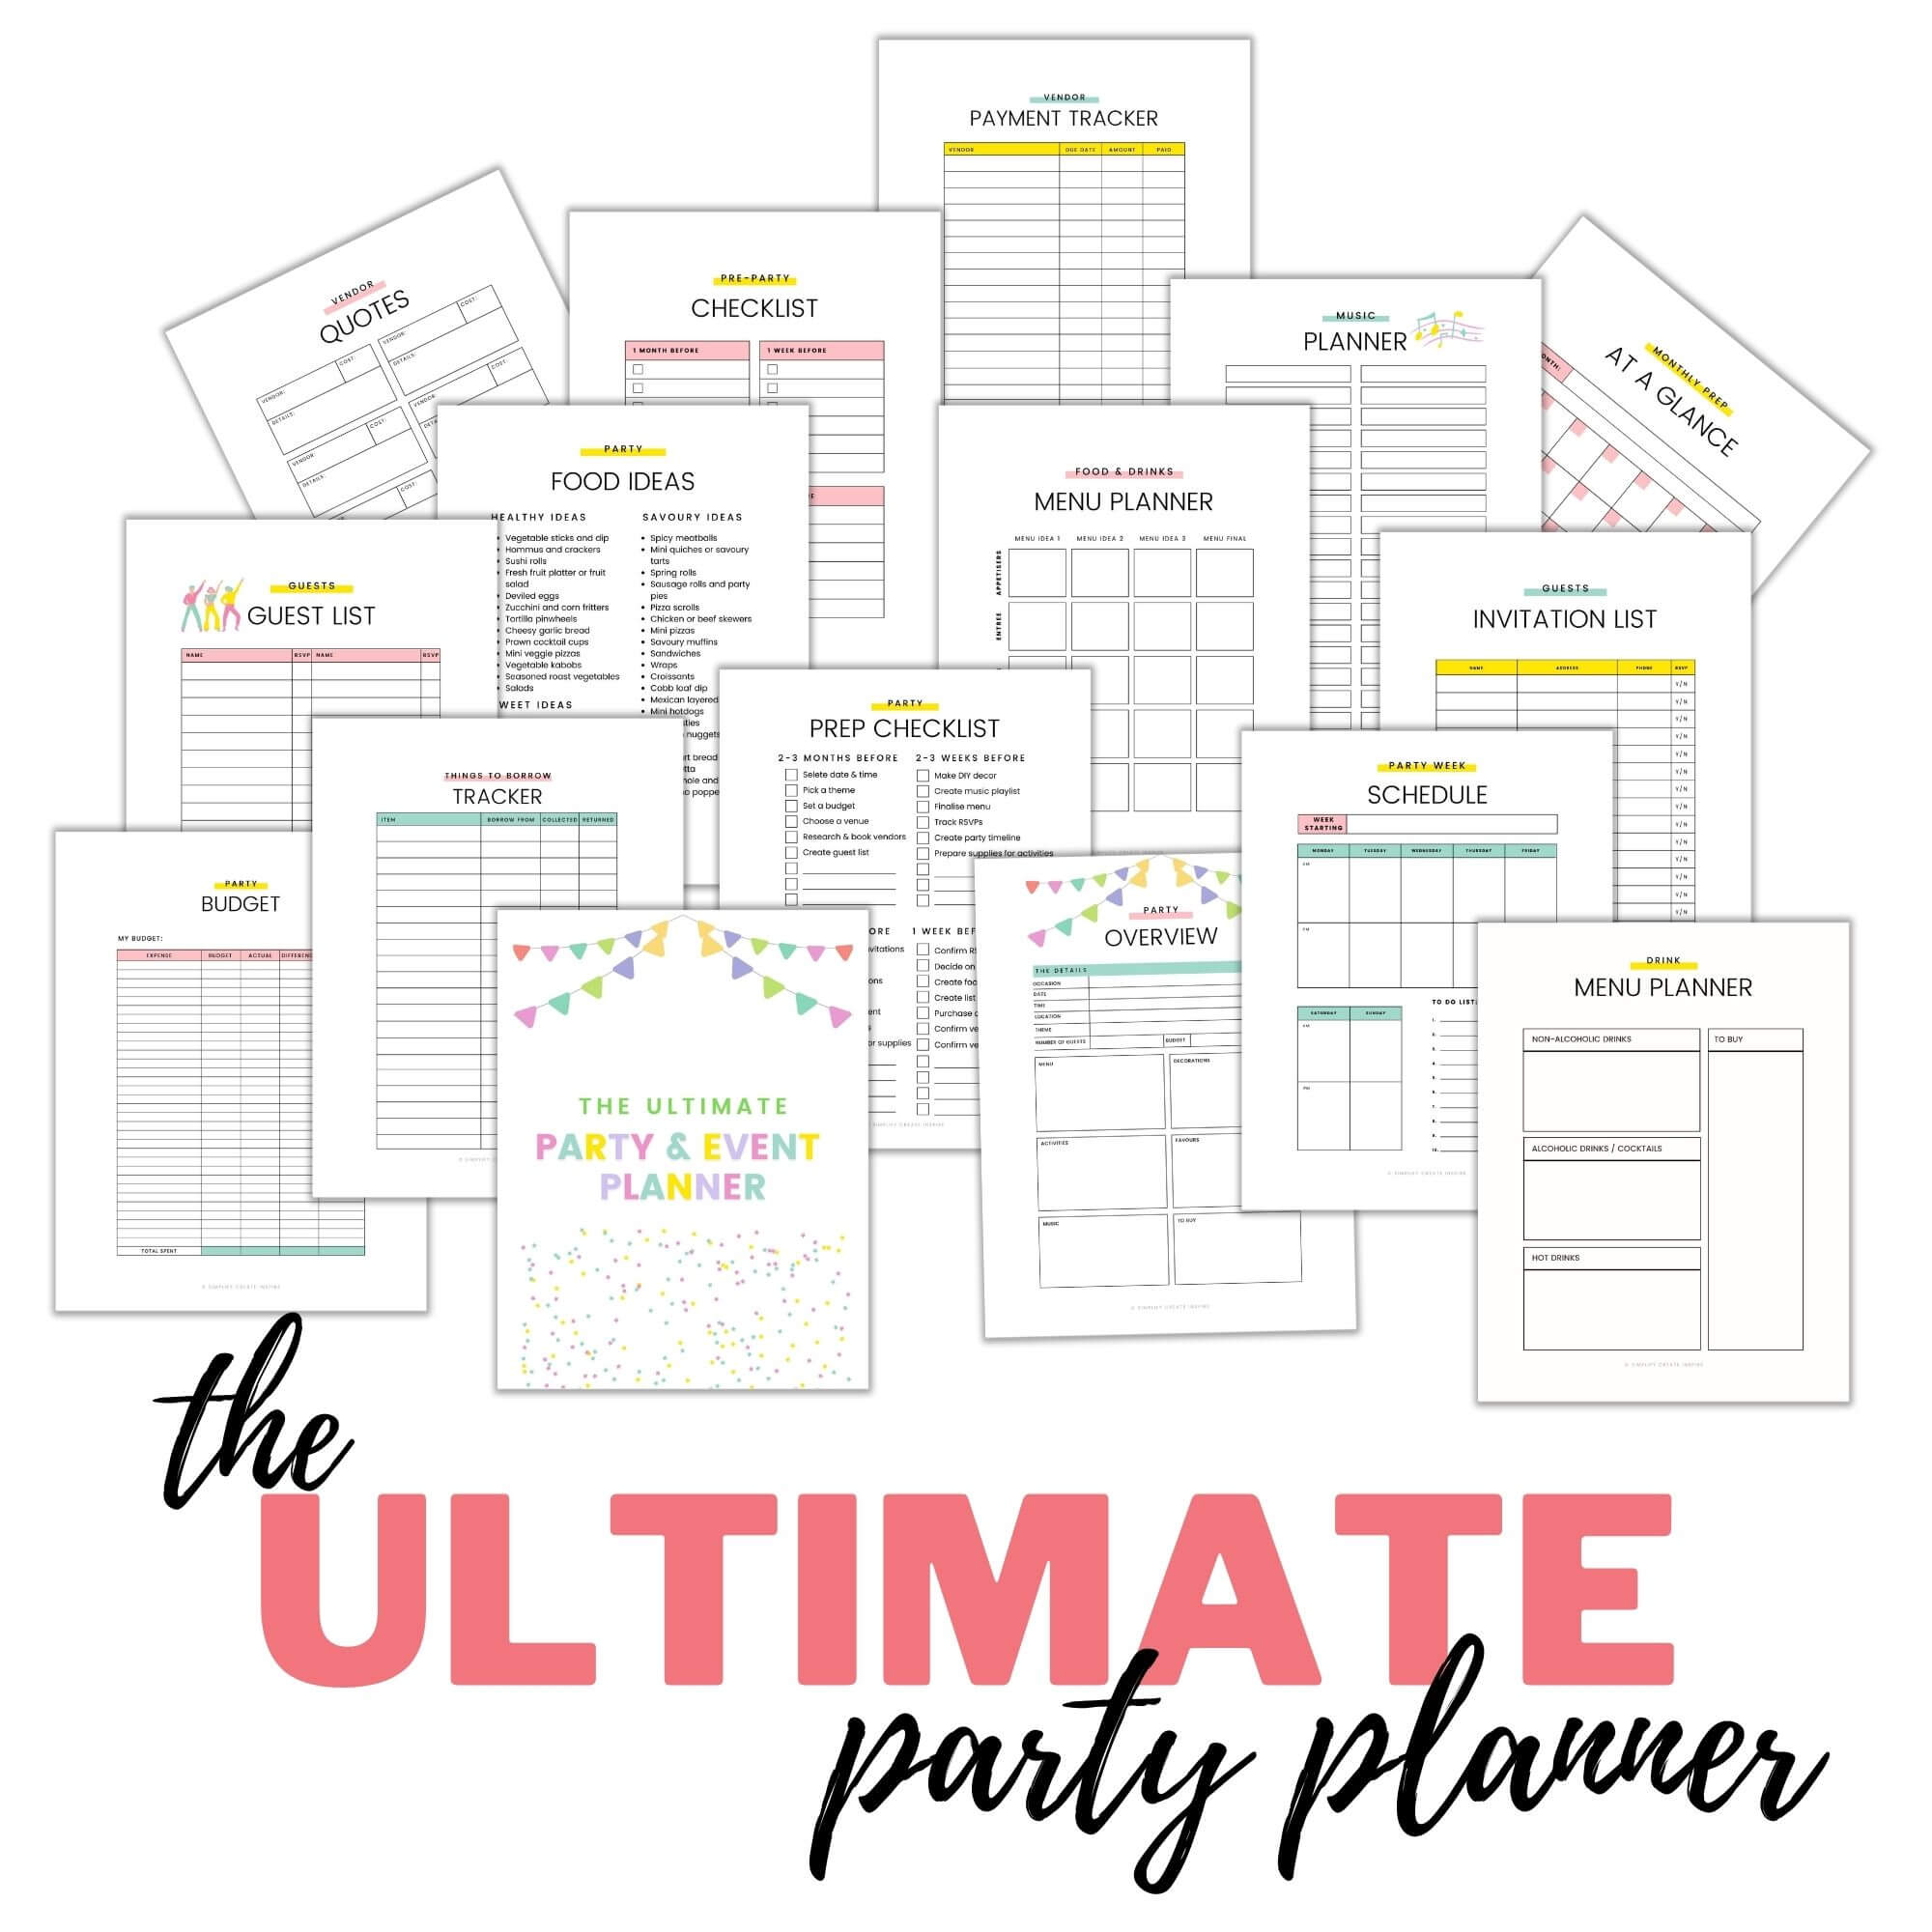 225 Awesome Party Themes For Adults: The Ultimate List | Simplify Create  Inspire